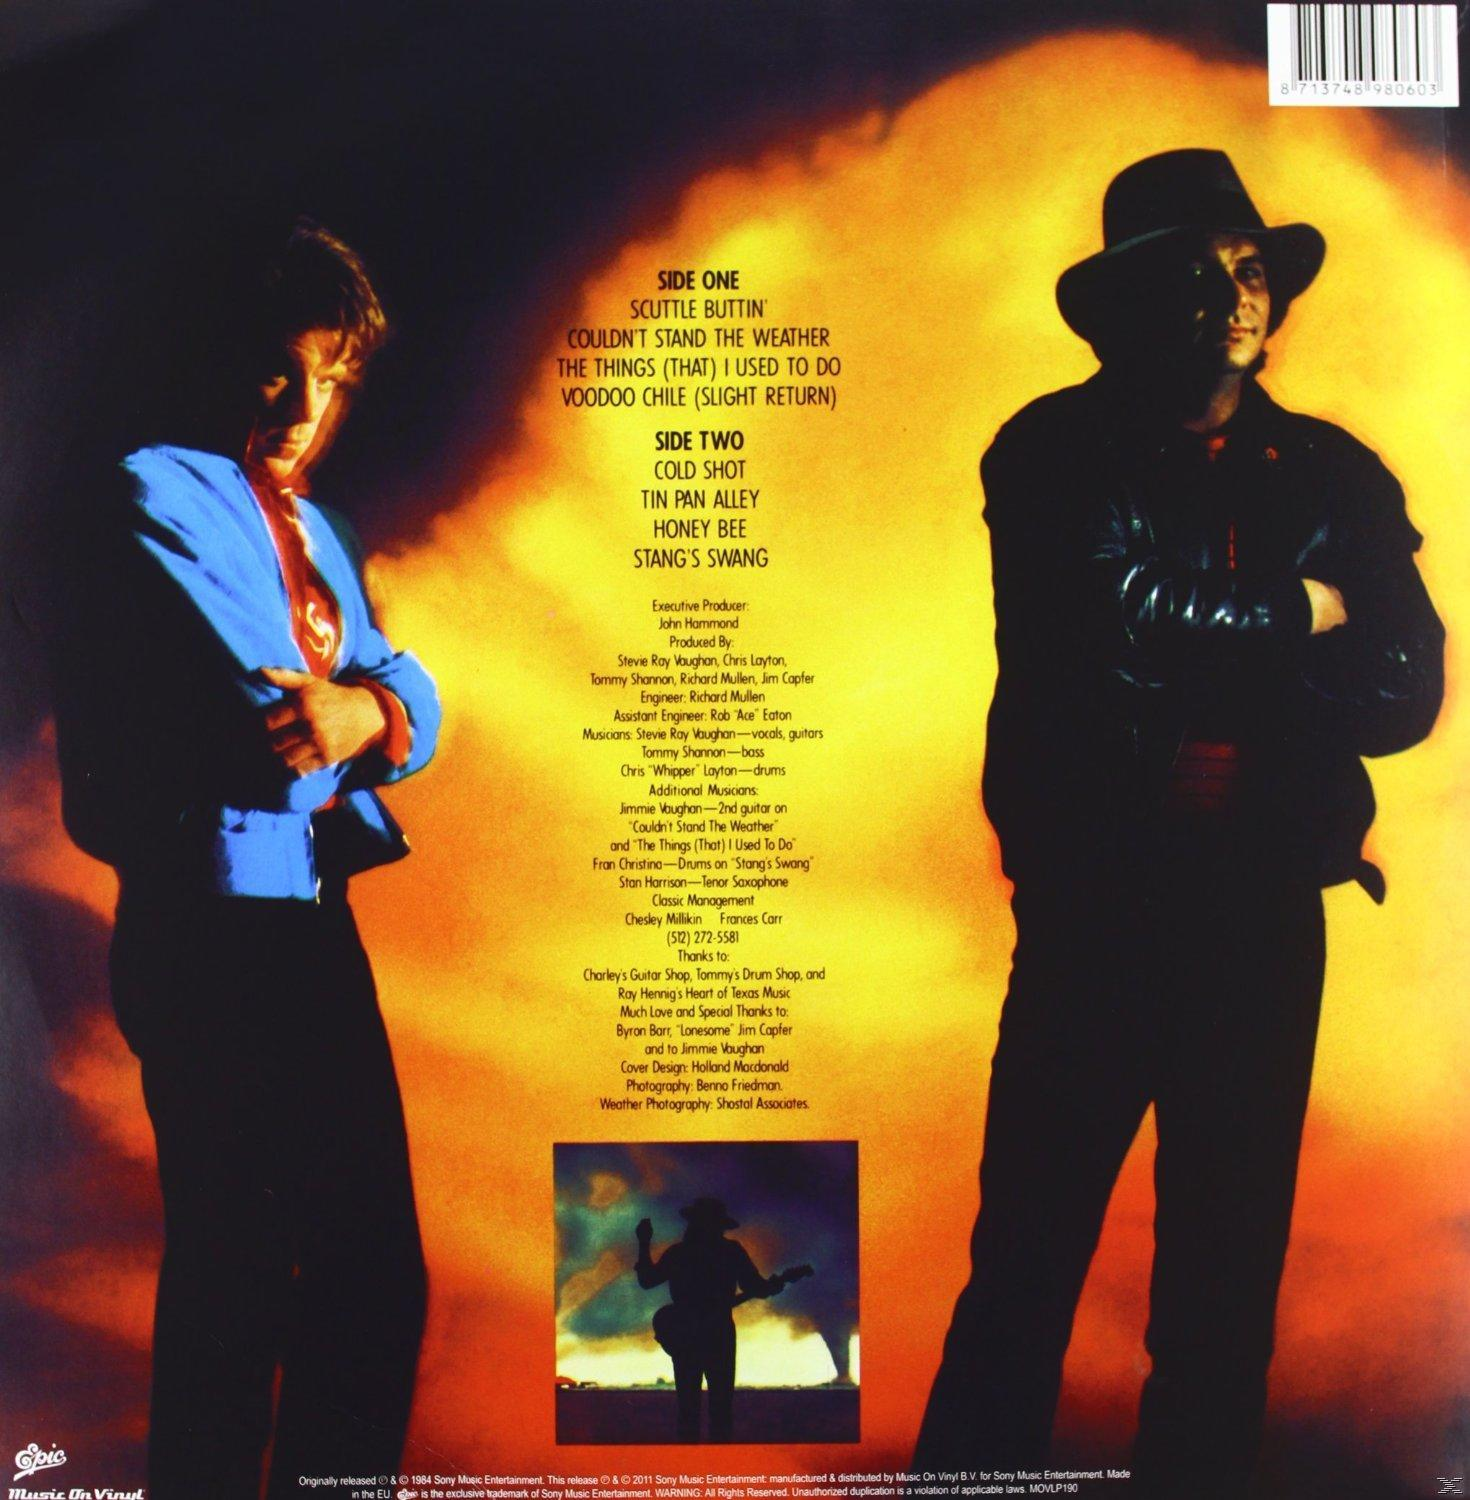 - The (Vinyl) Couldn\'t Ray Stevie Vaughan Weather Stand -